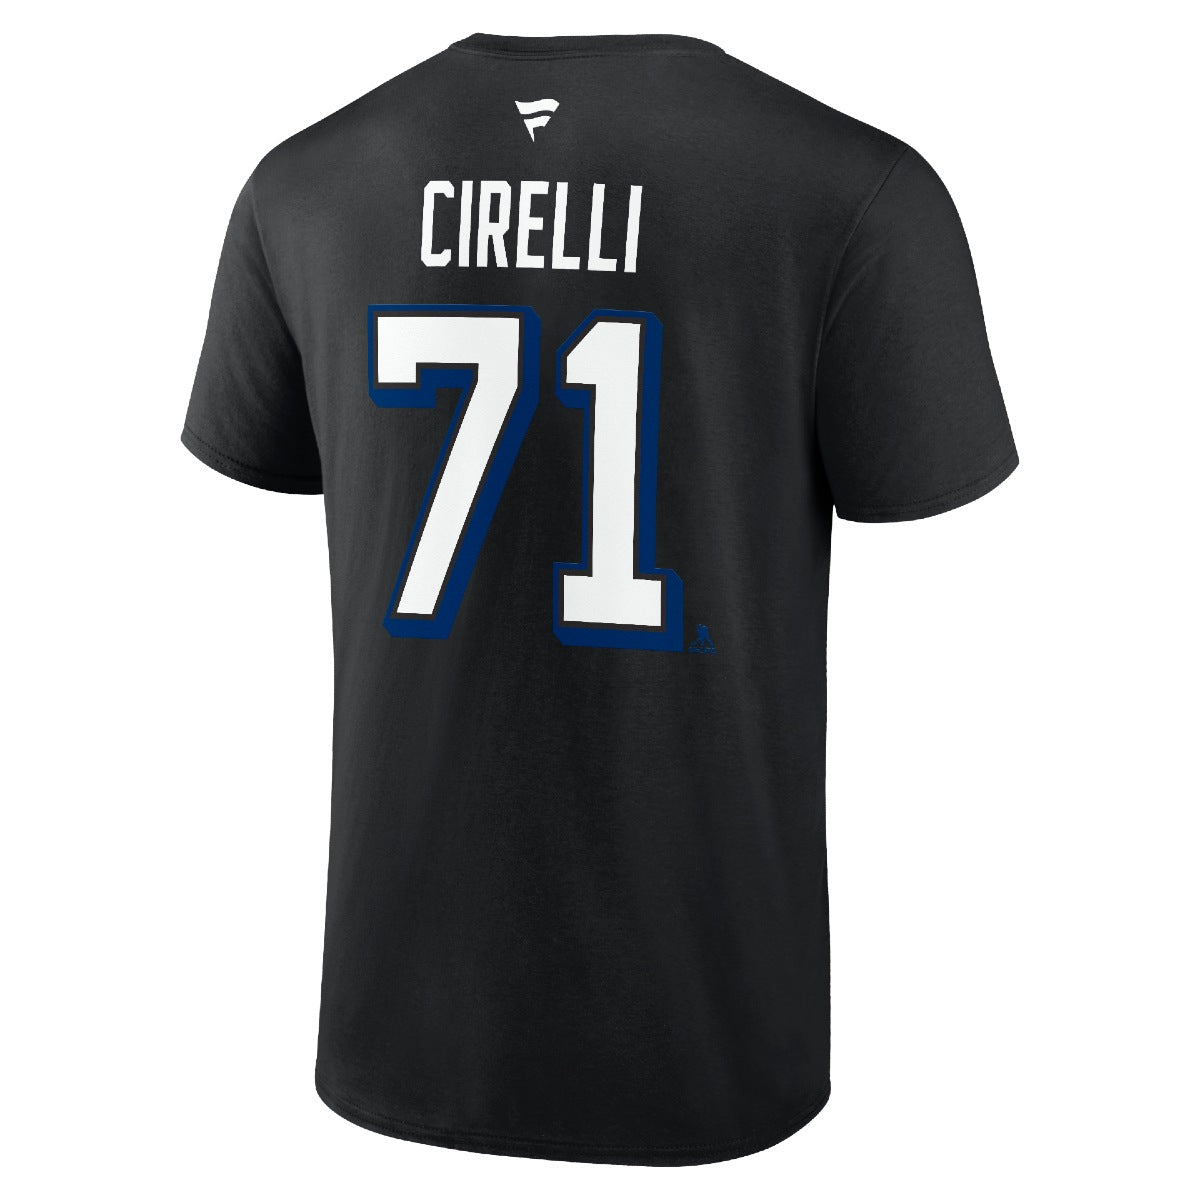 Men's Tampa Bay Lightning Third Jersey Anthony Cirelli Name and Number Tee